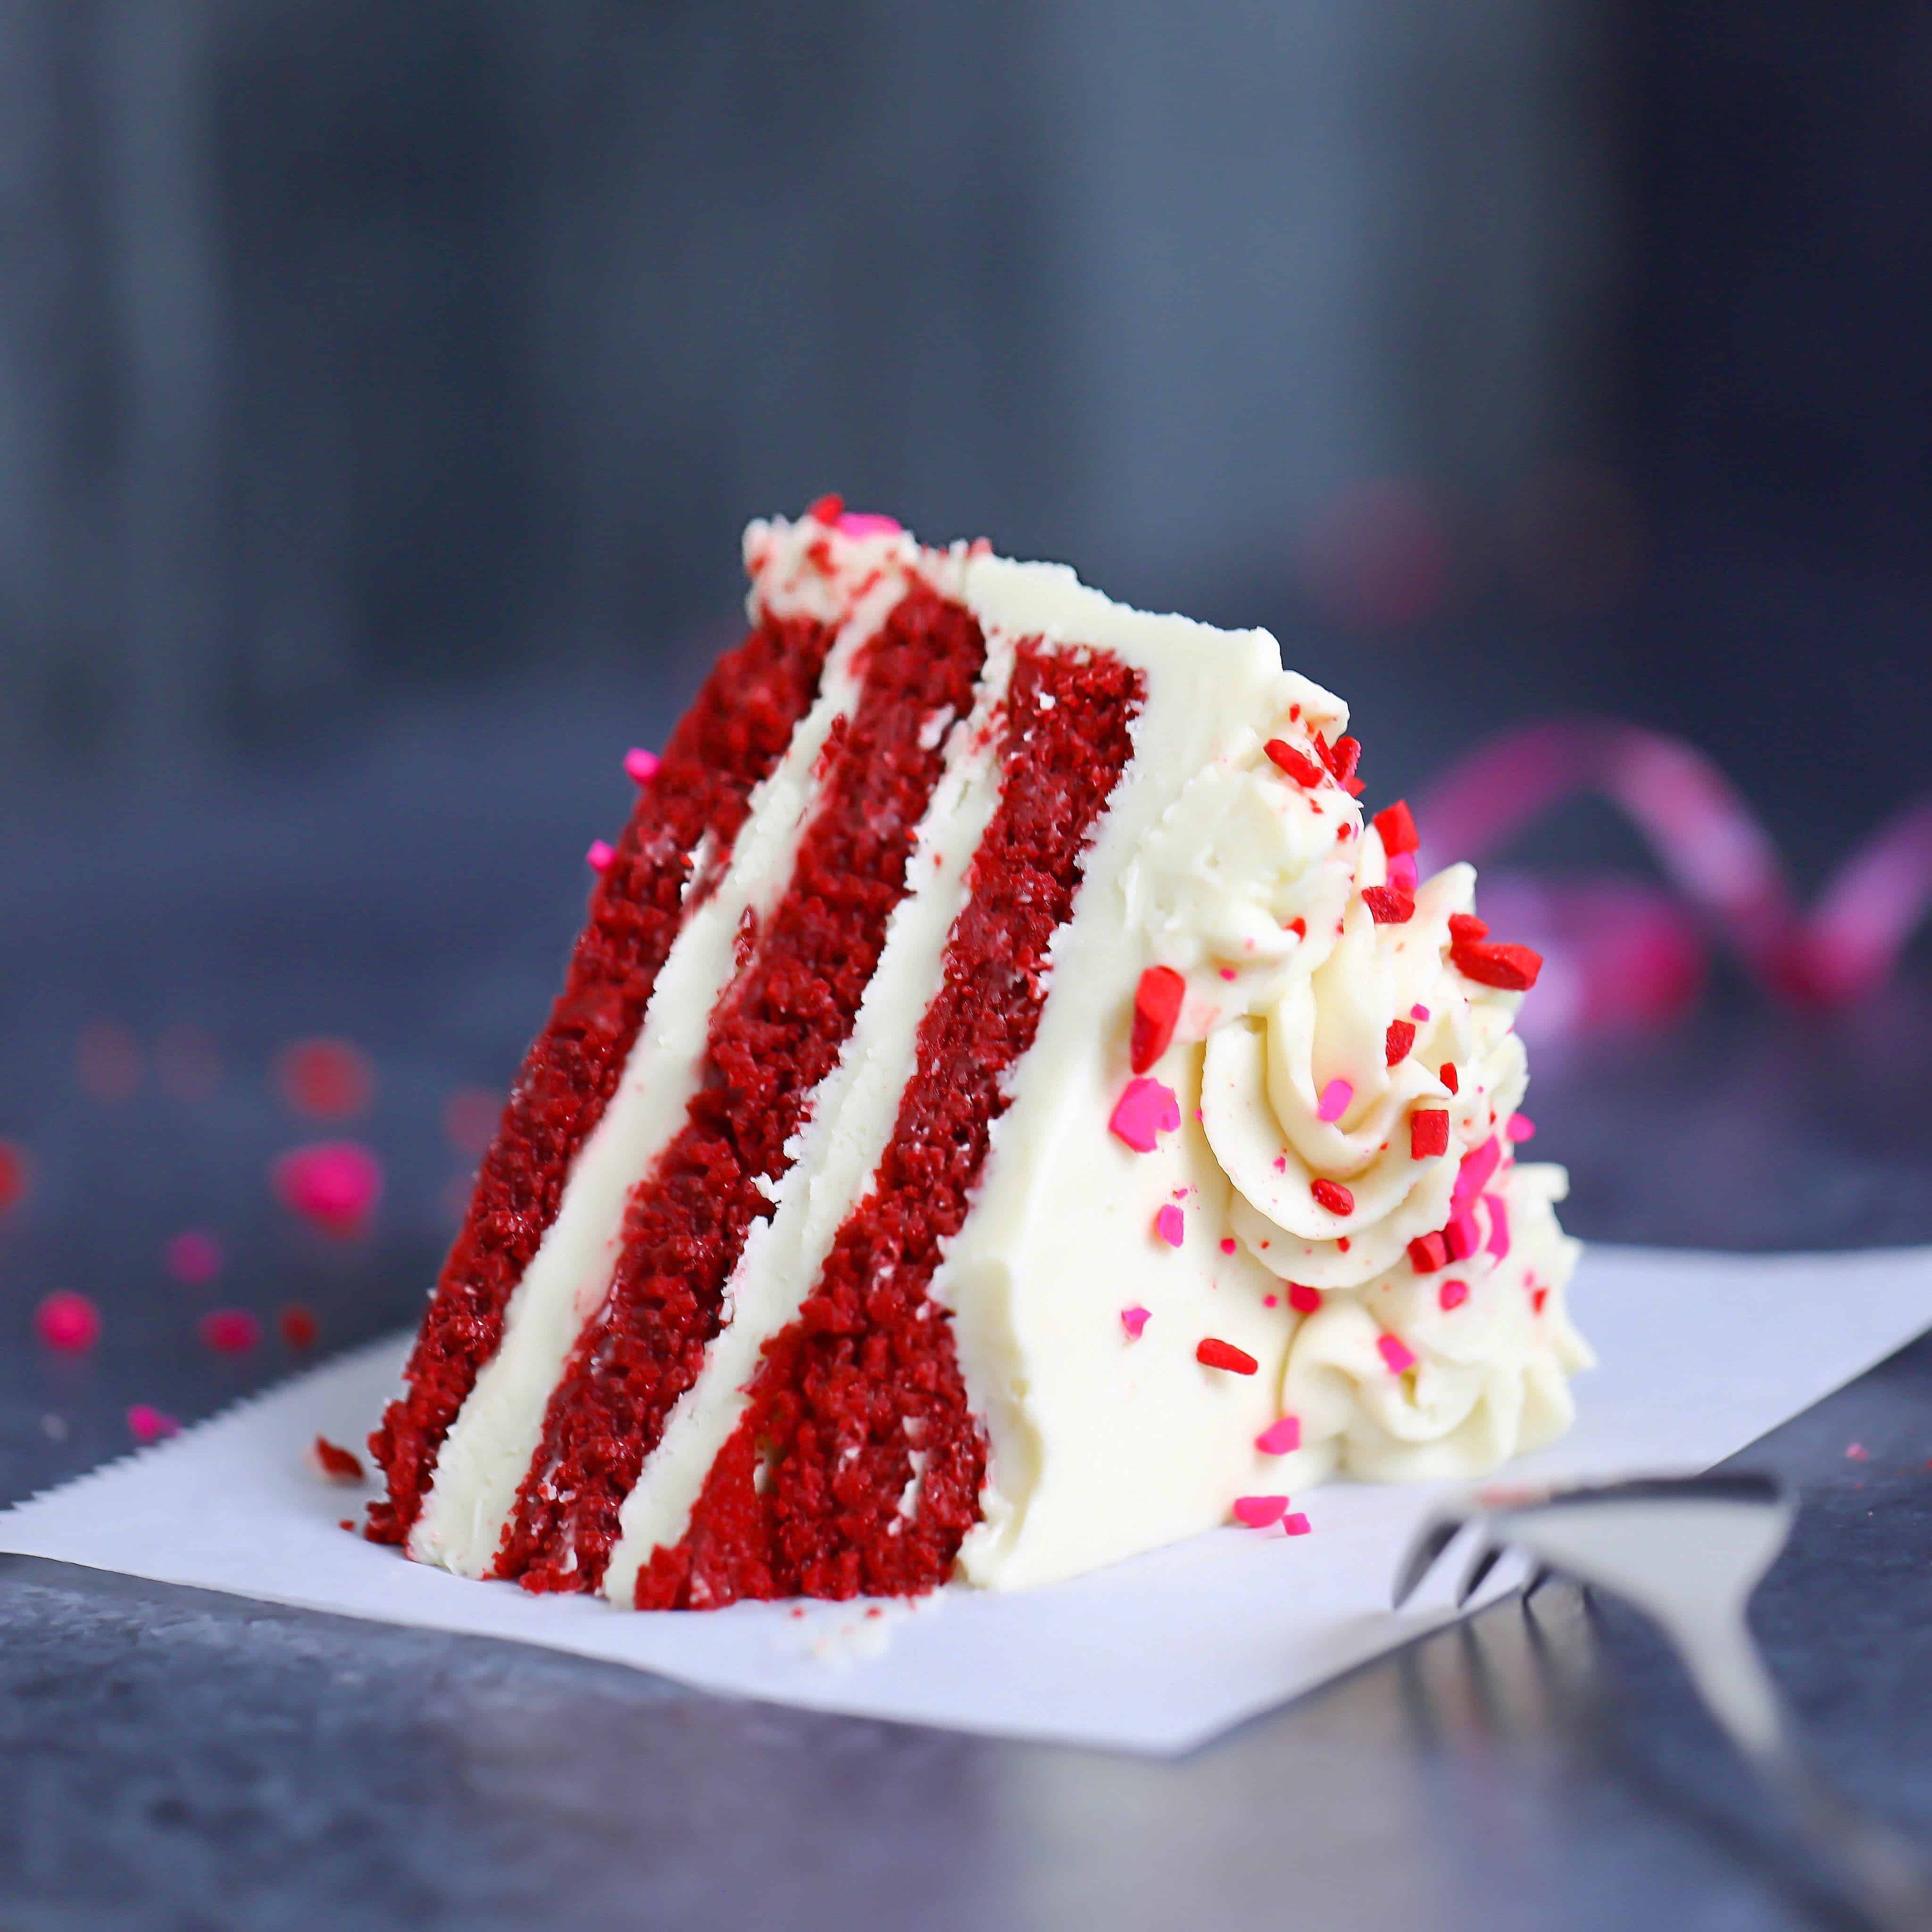 Low-Carb Red Velvet Cake/Cupcakes